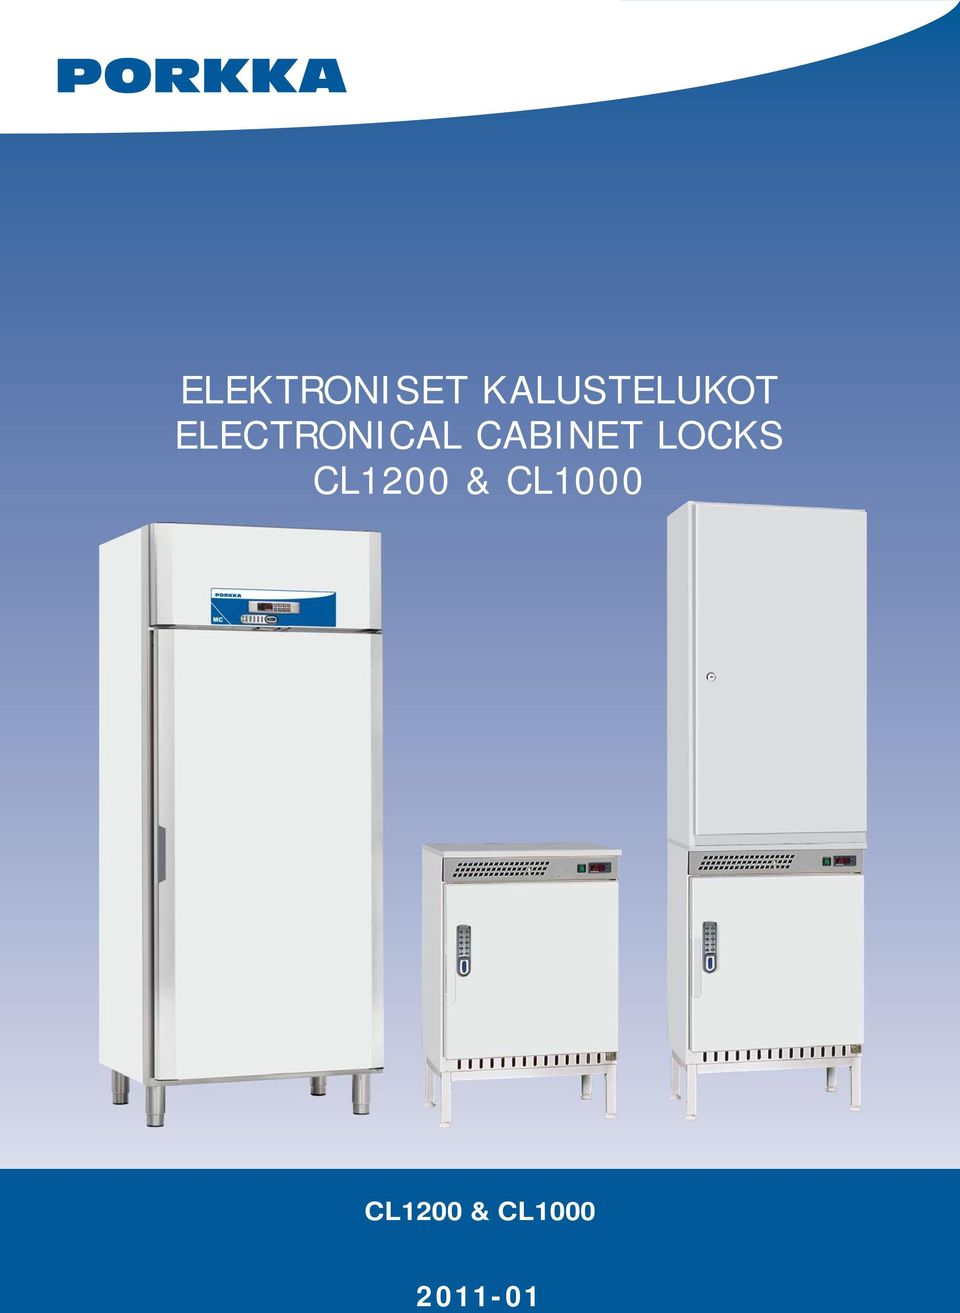 ELECTRONICAL CABINET